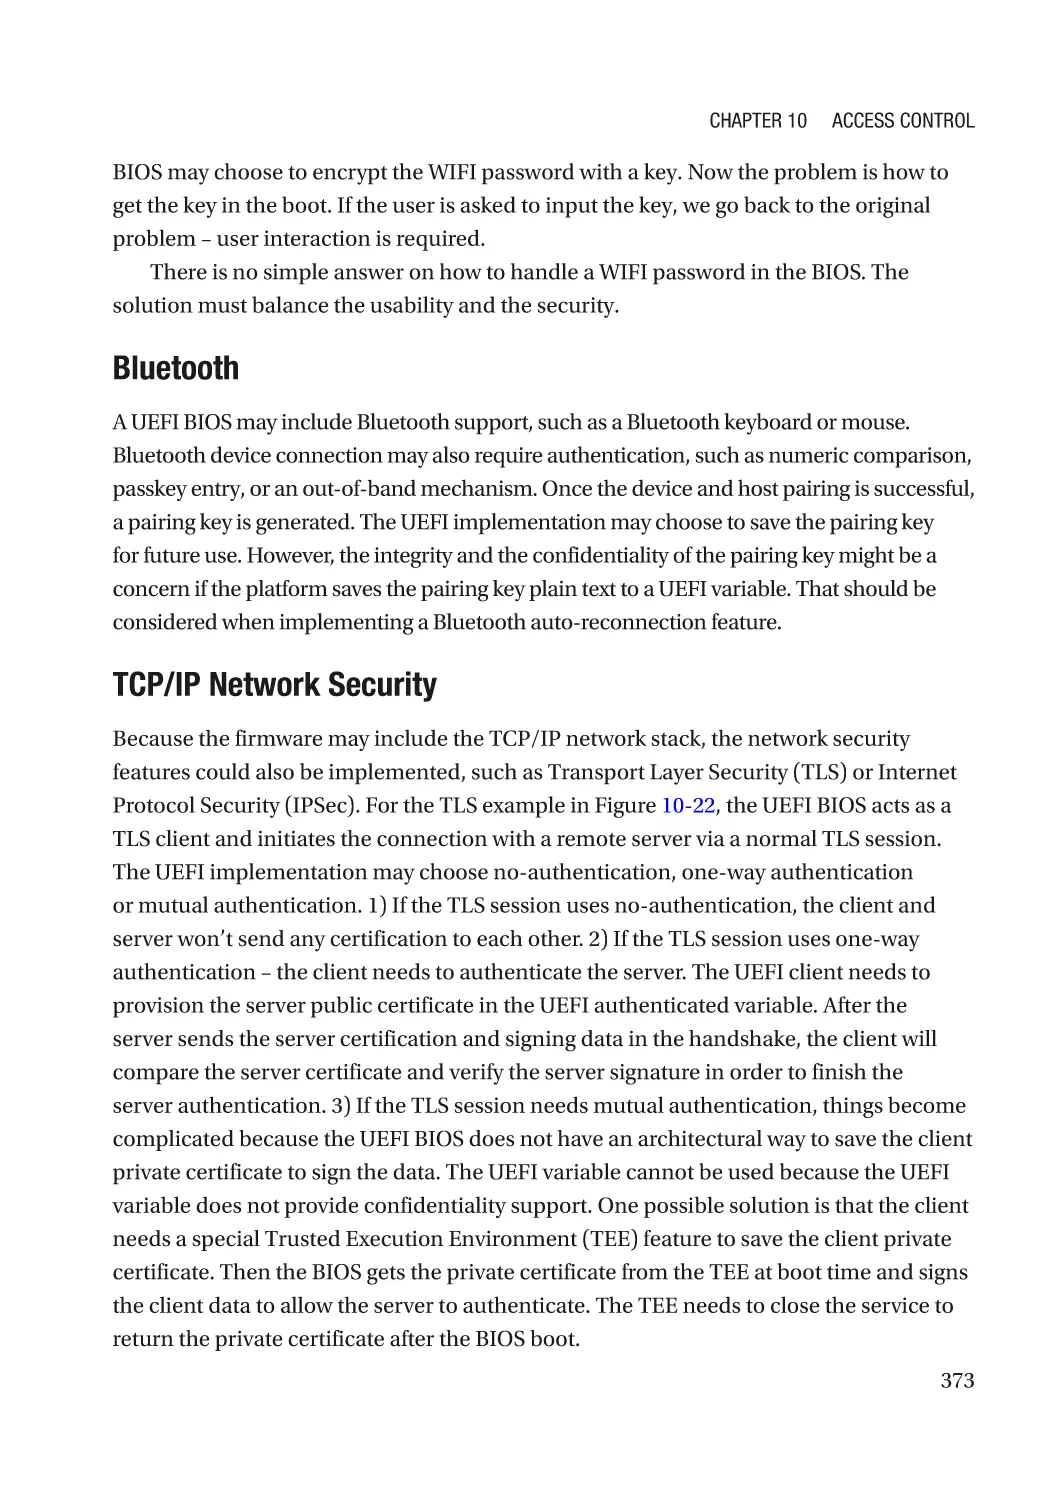 Bluetooth
TCP/IP Network Security